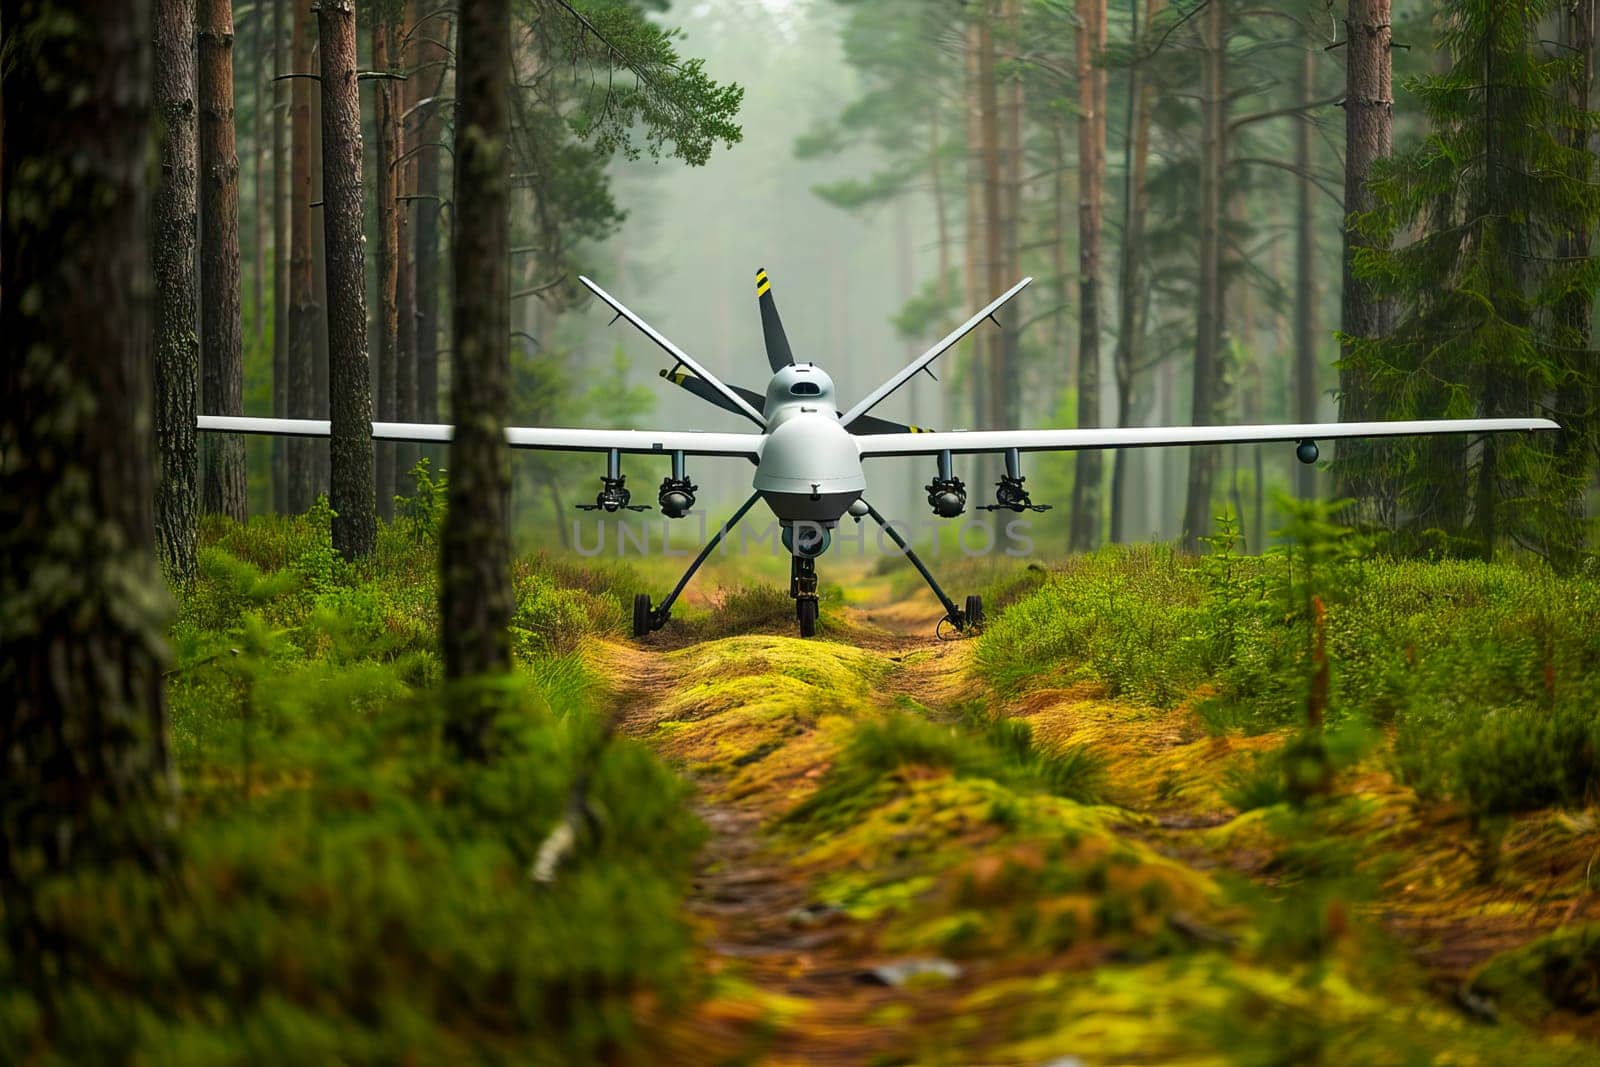 Military plane is parked in the dense forest surrounded by trees and foliage. by vladimka